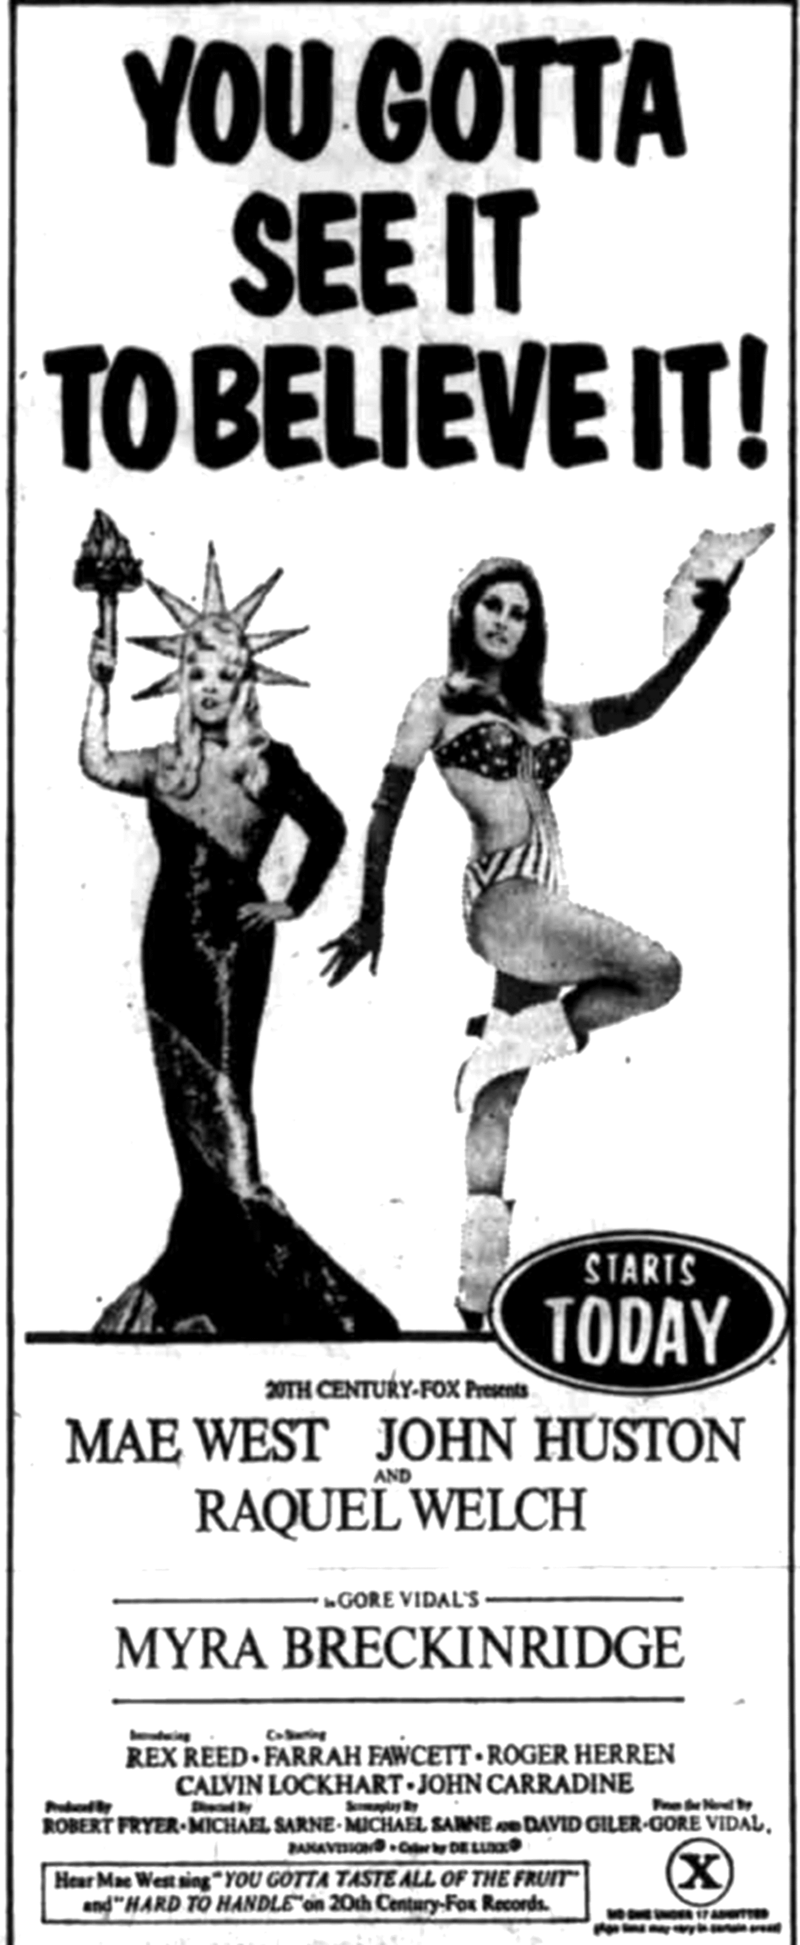 Theatrical advertisement from 1970